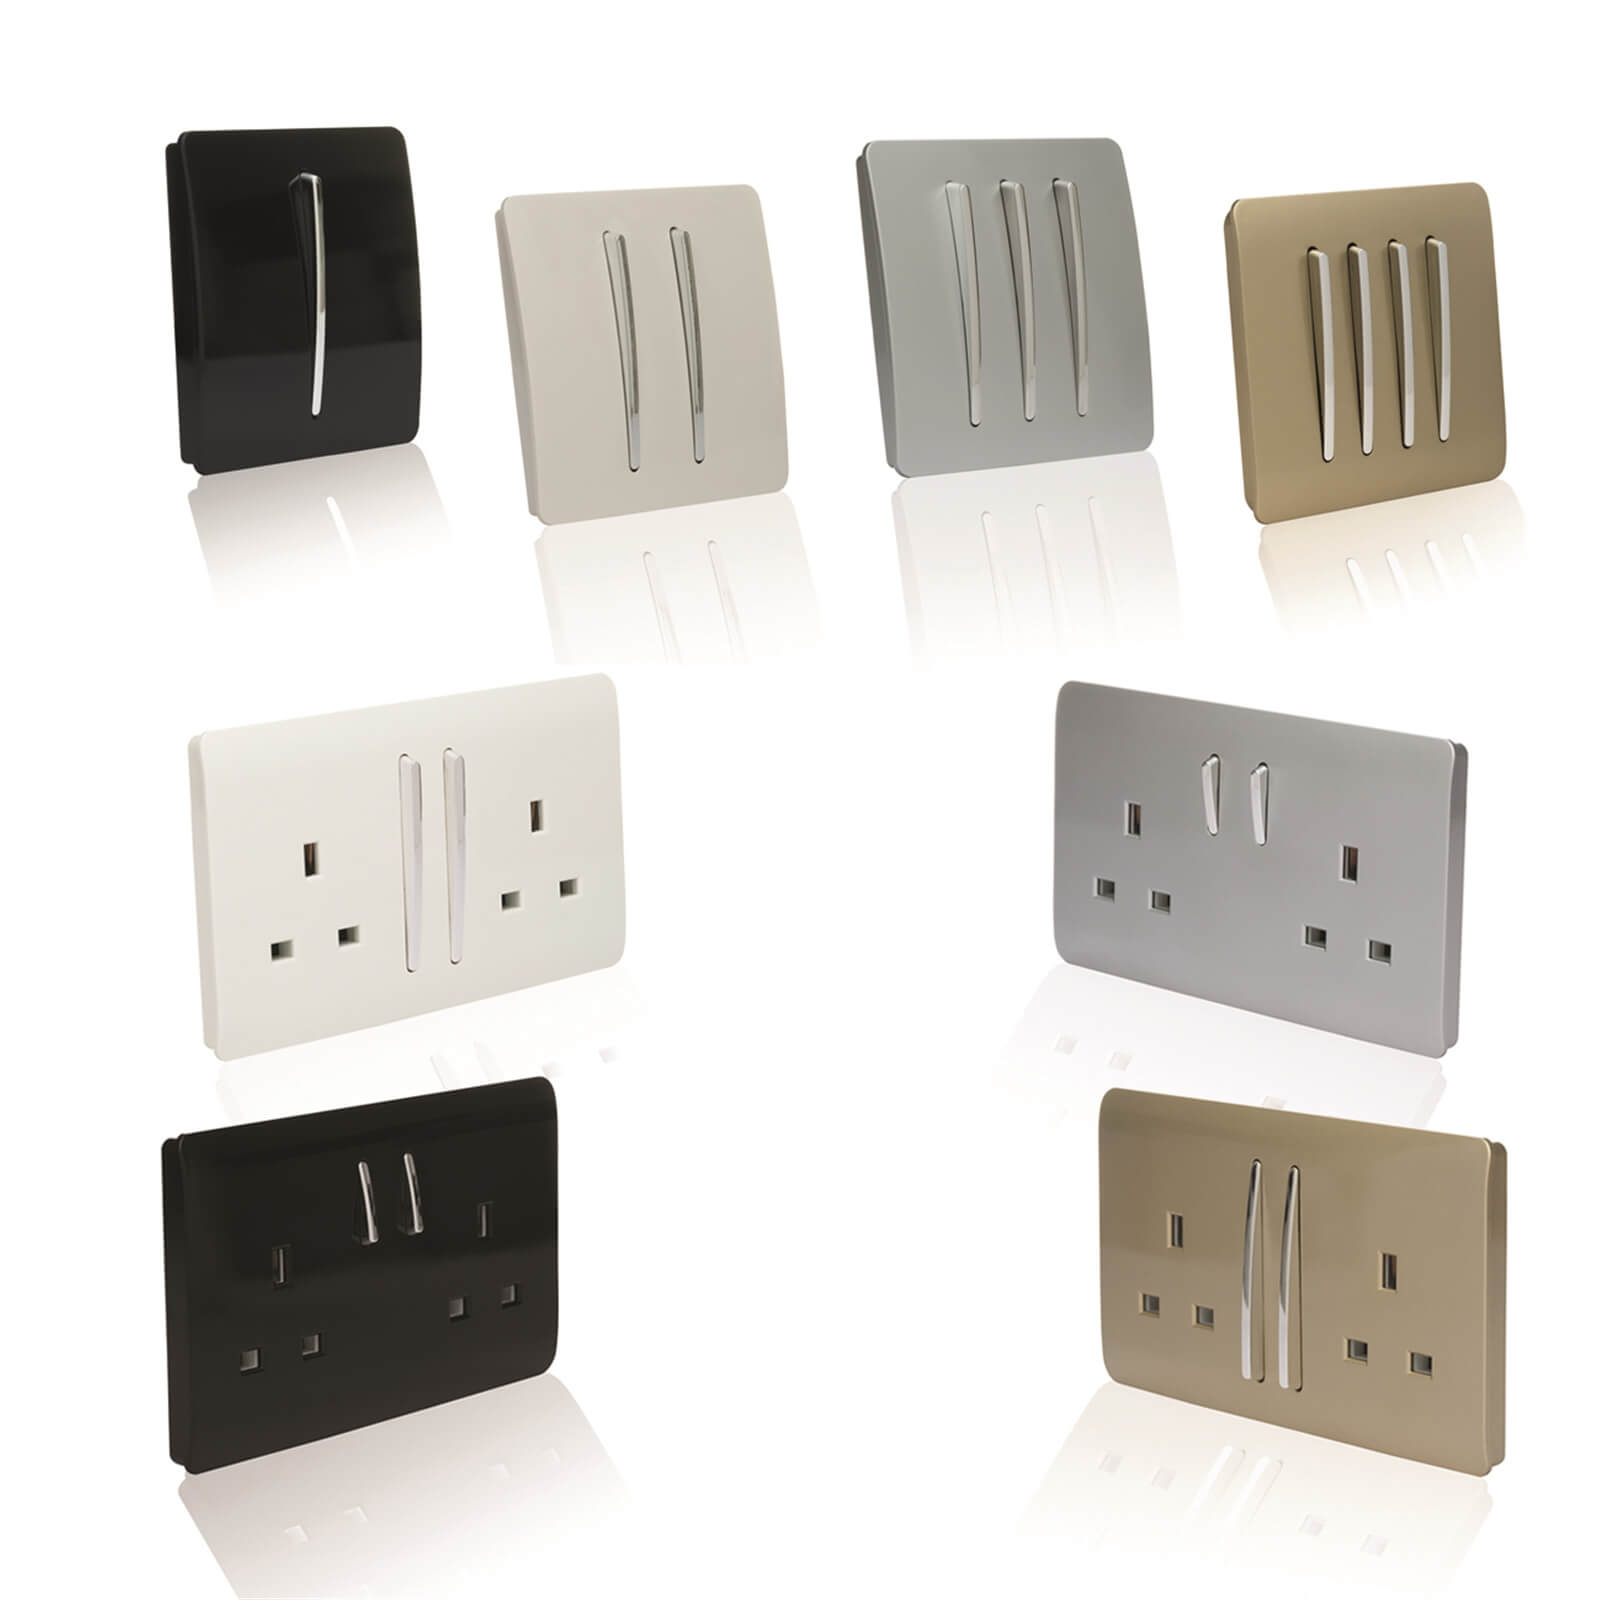 Trendi Switch TV Co-axial and Telephone Sockets in Screwless Silver